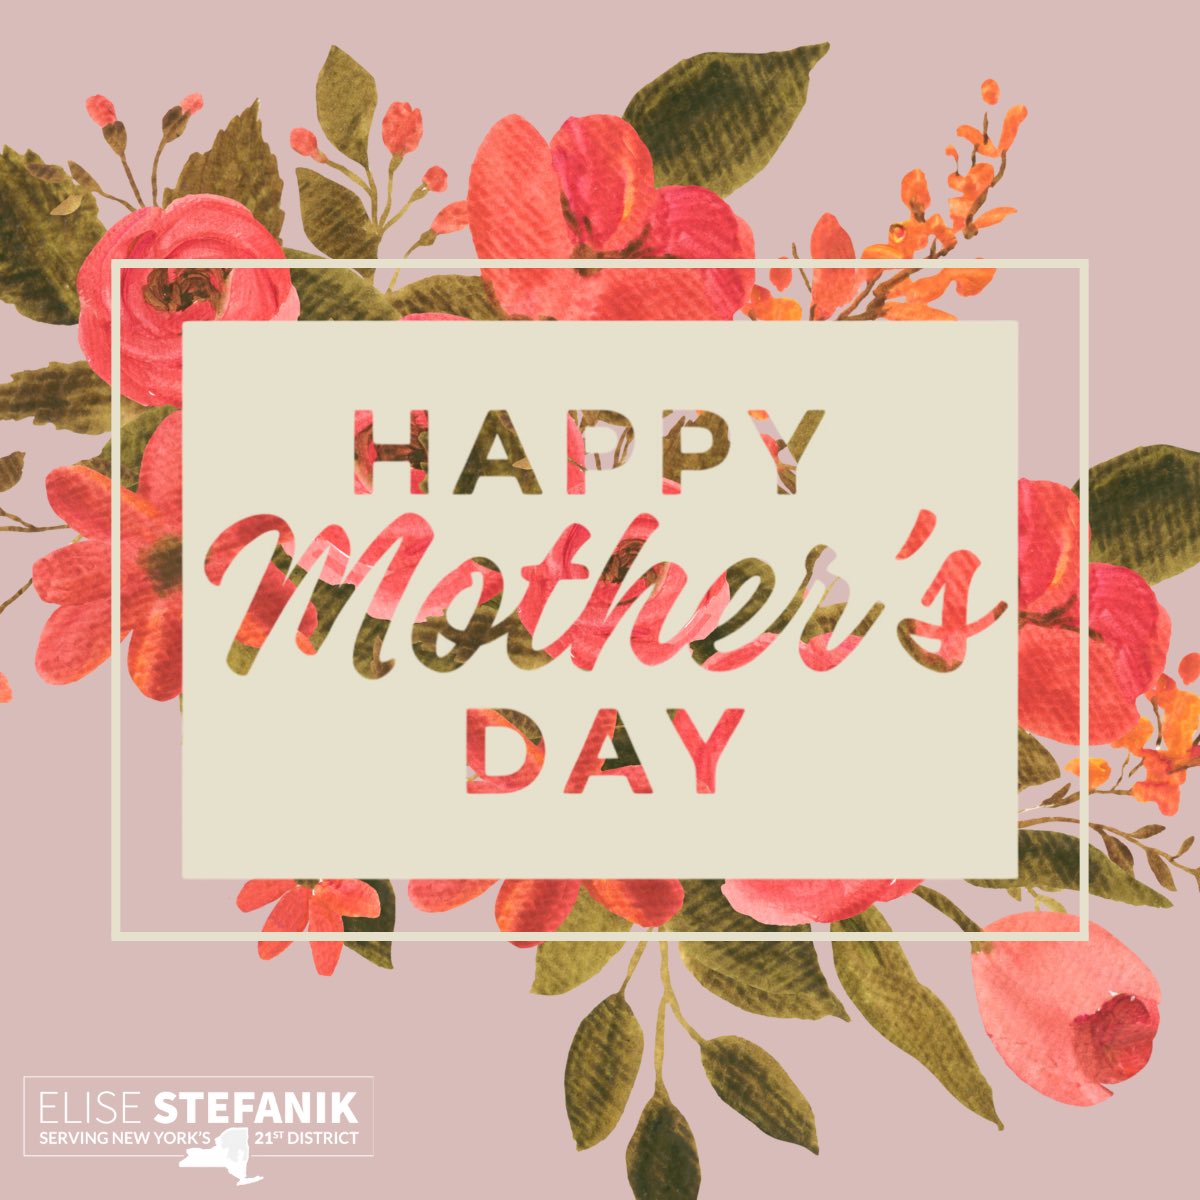 Happy Mother’s Day to all the moms across #NY21 & America.